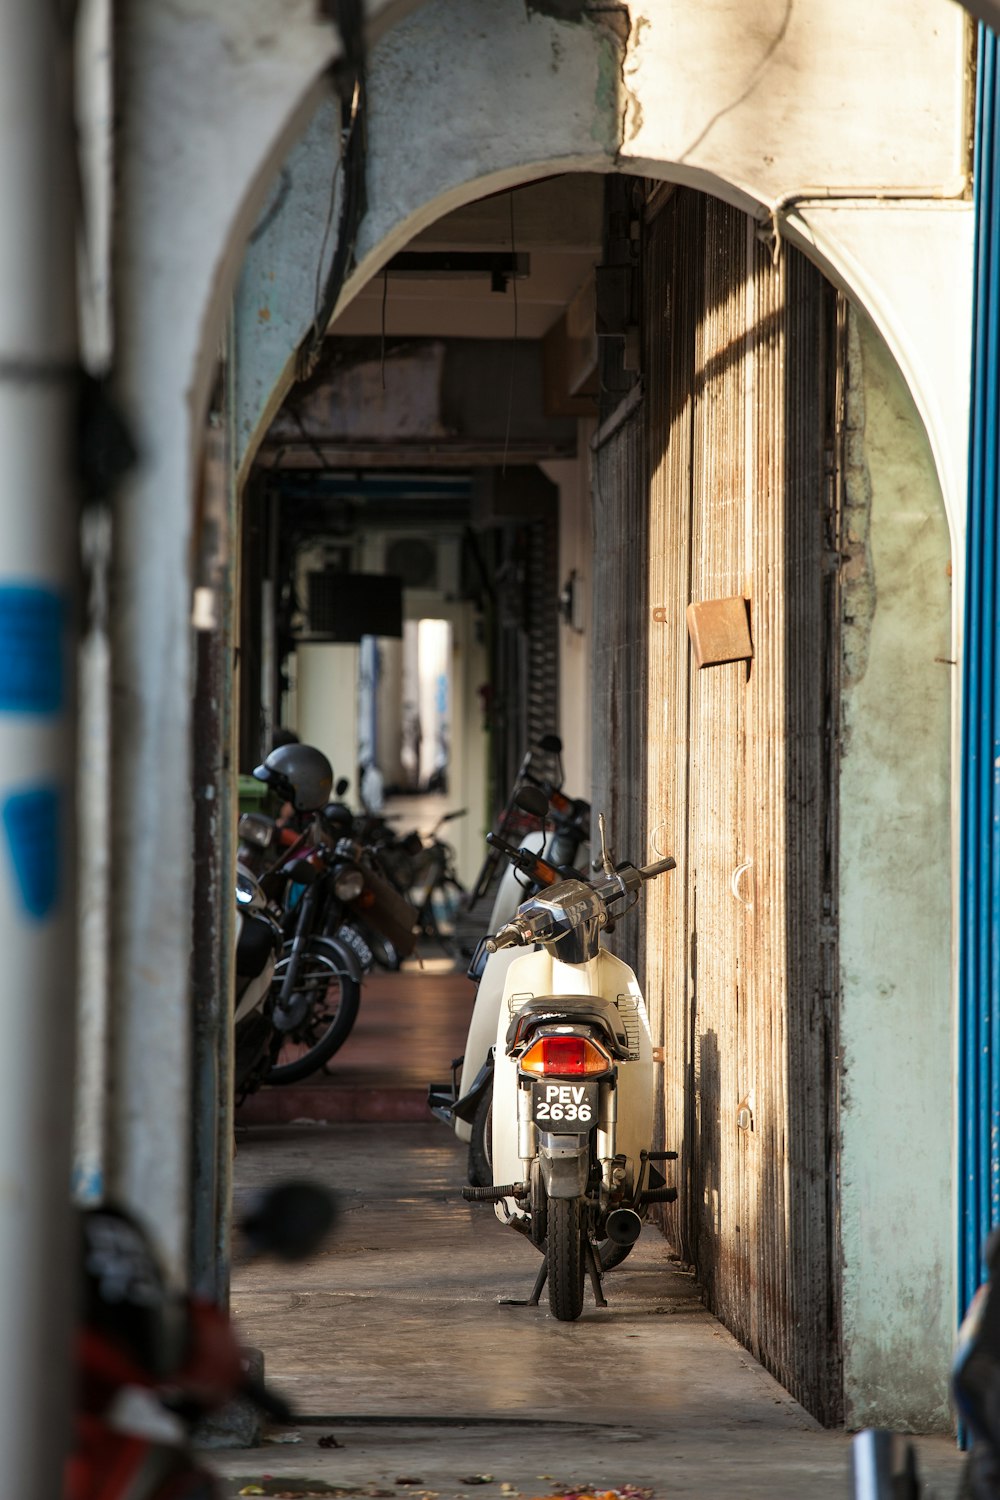 white and black motorcycle parked beside blue and white concrete building during daytime